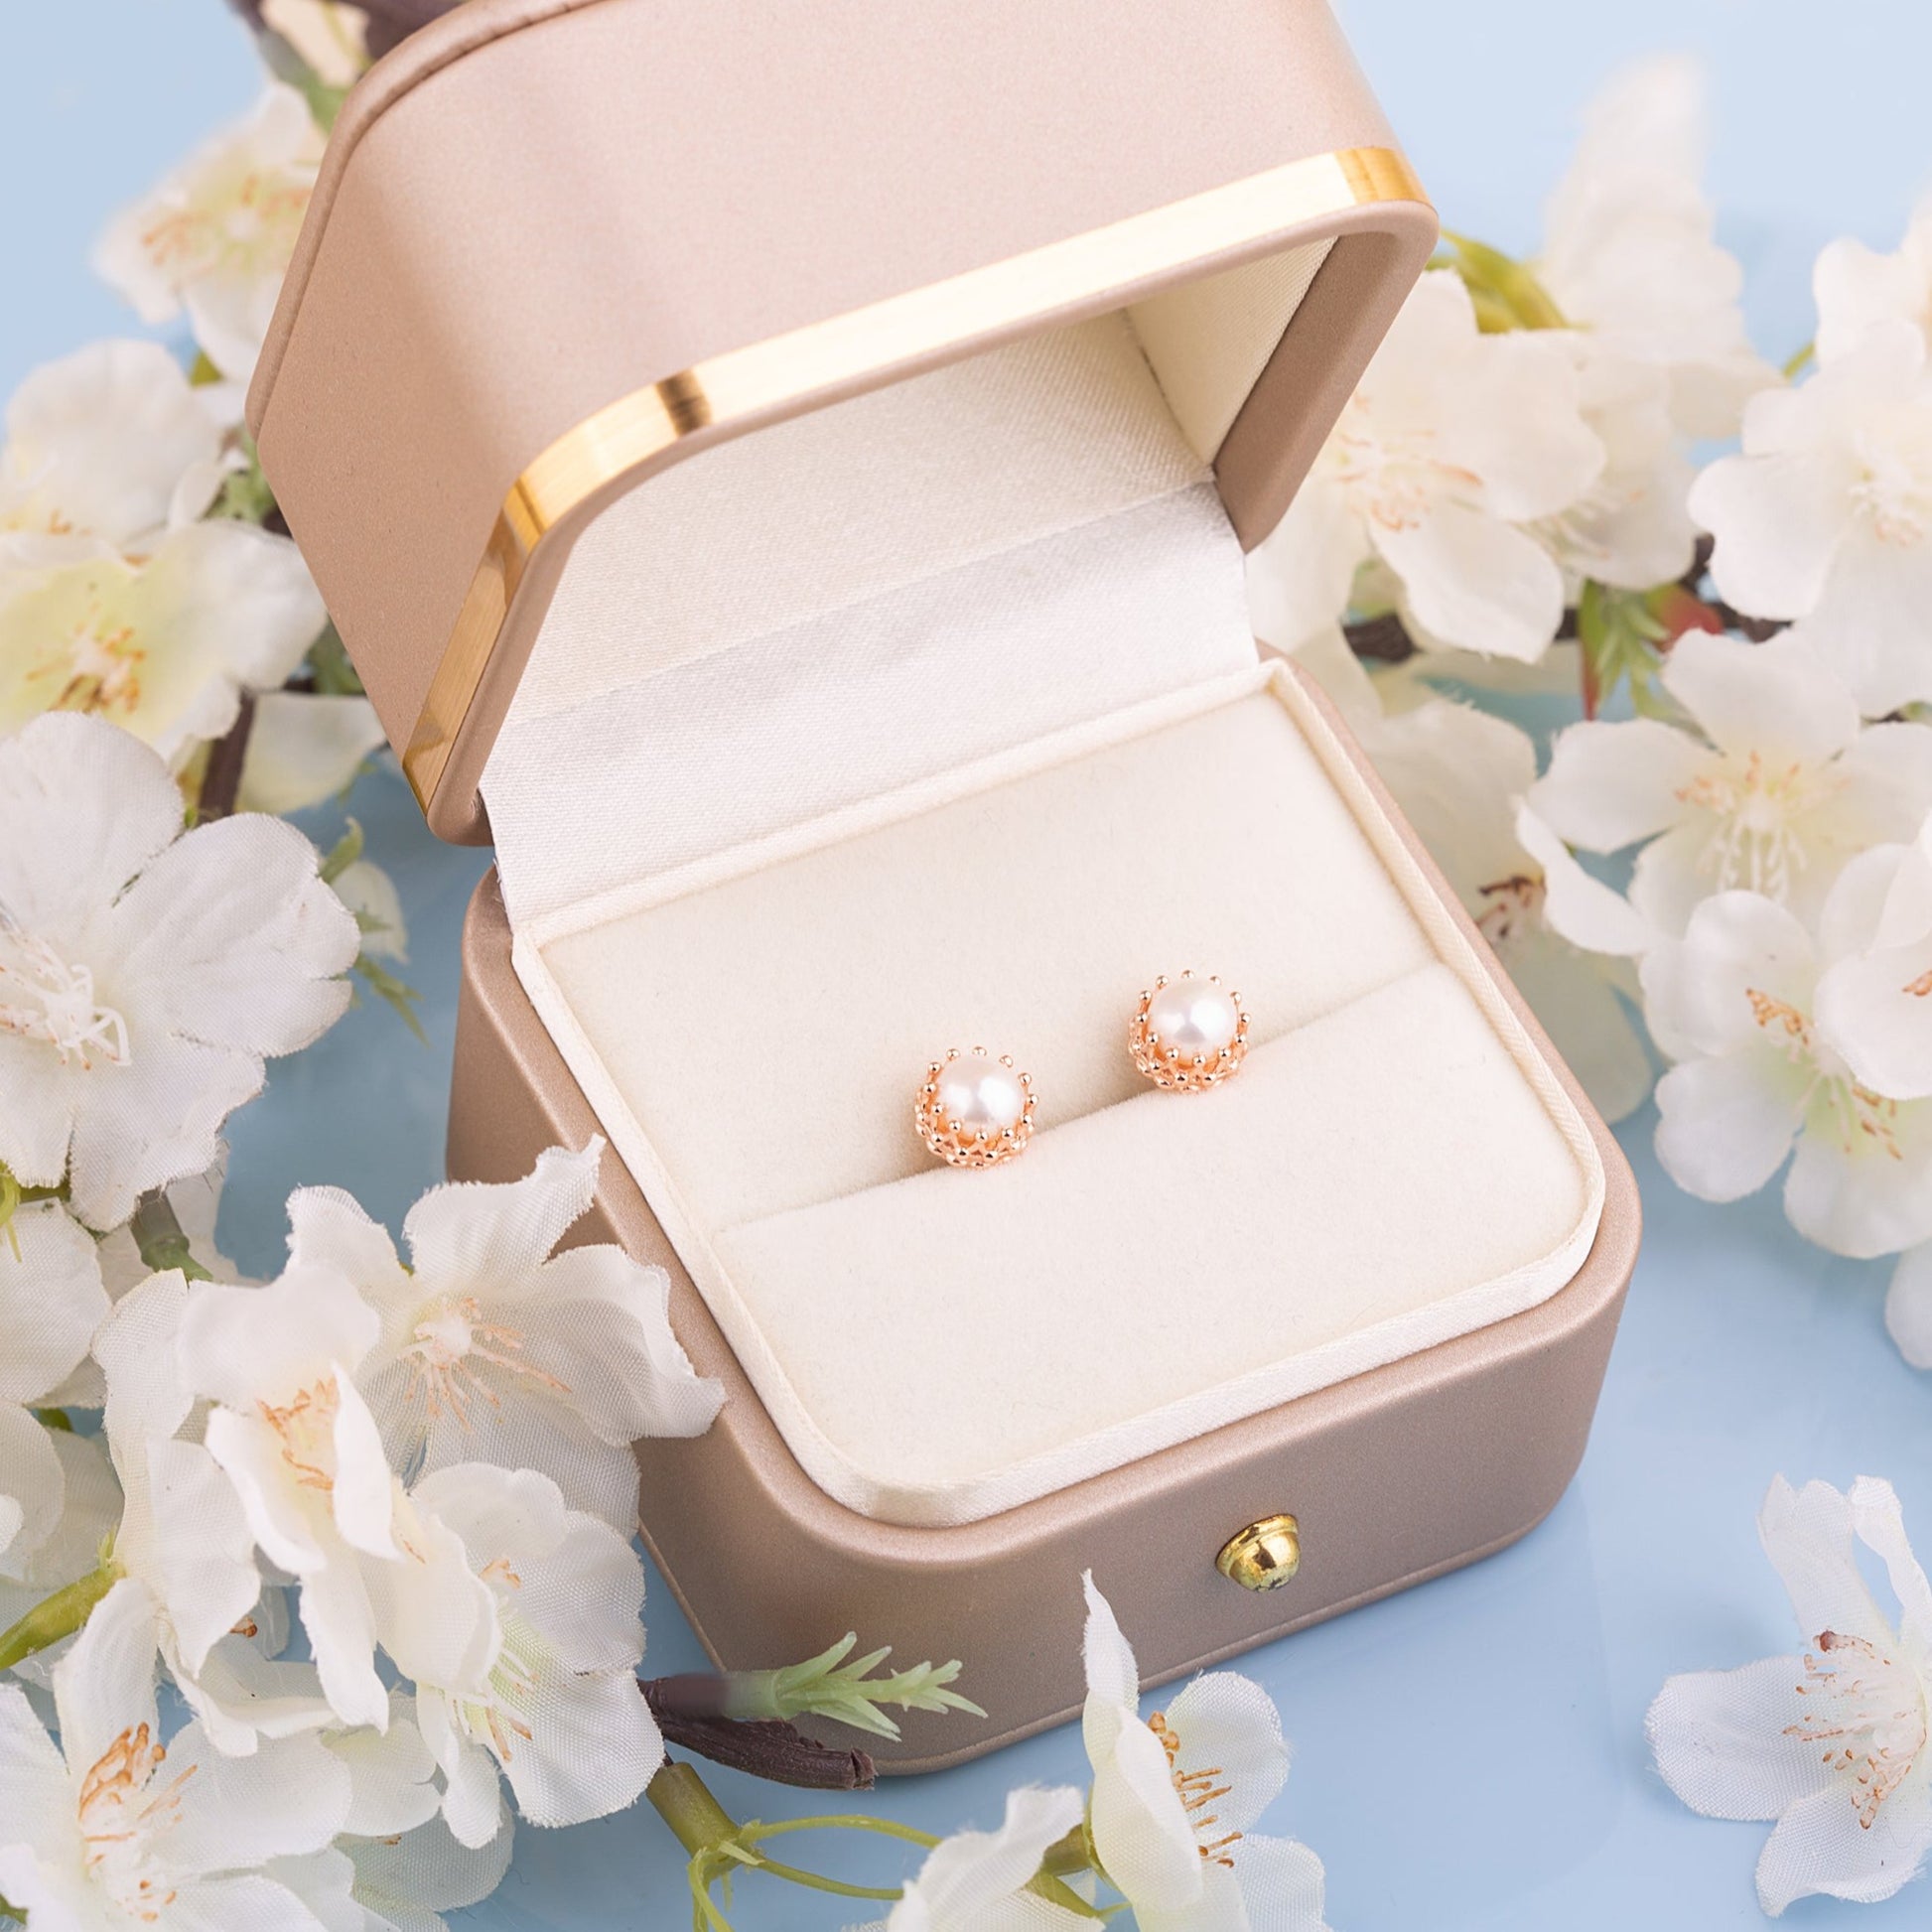 Two Pearl crown studs in a gift box